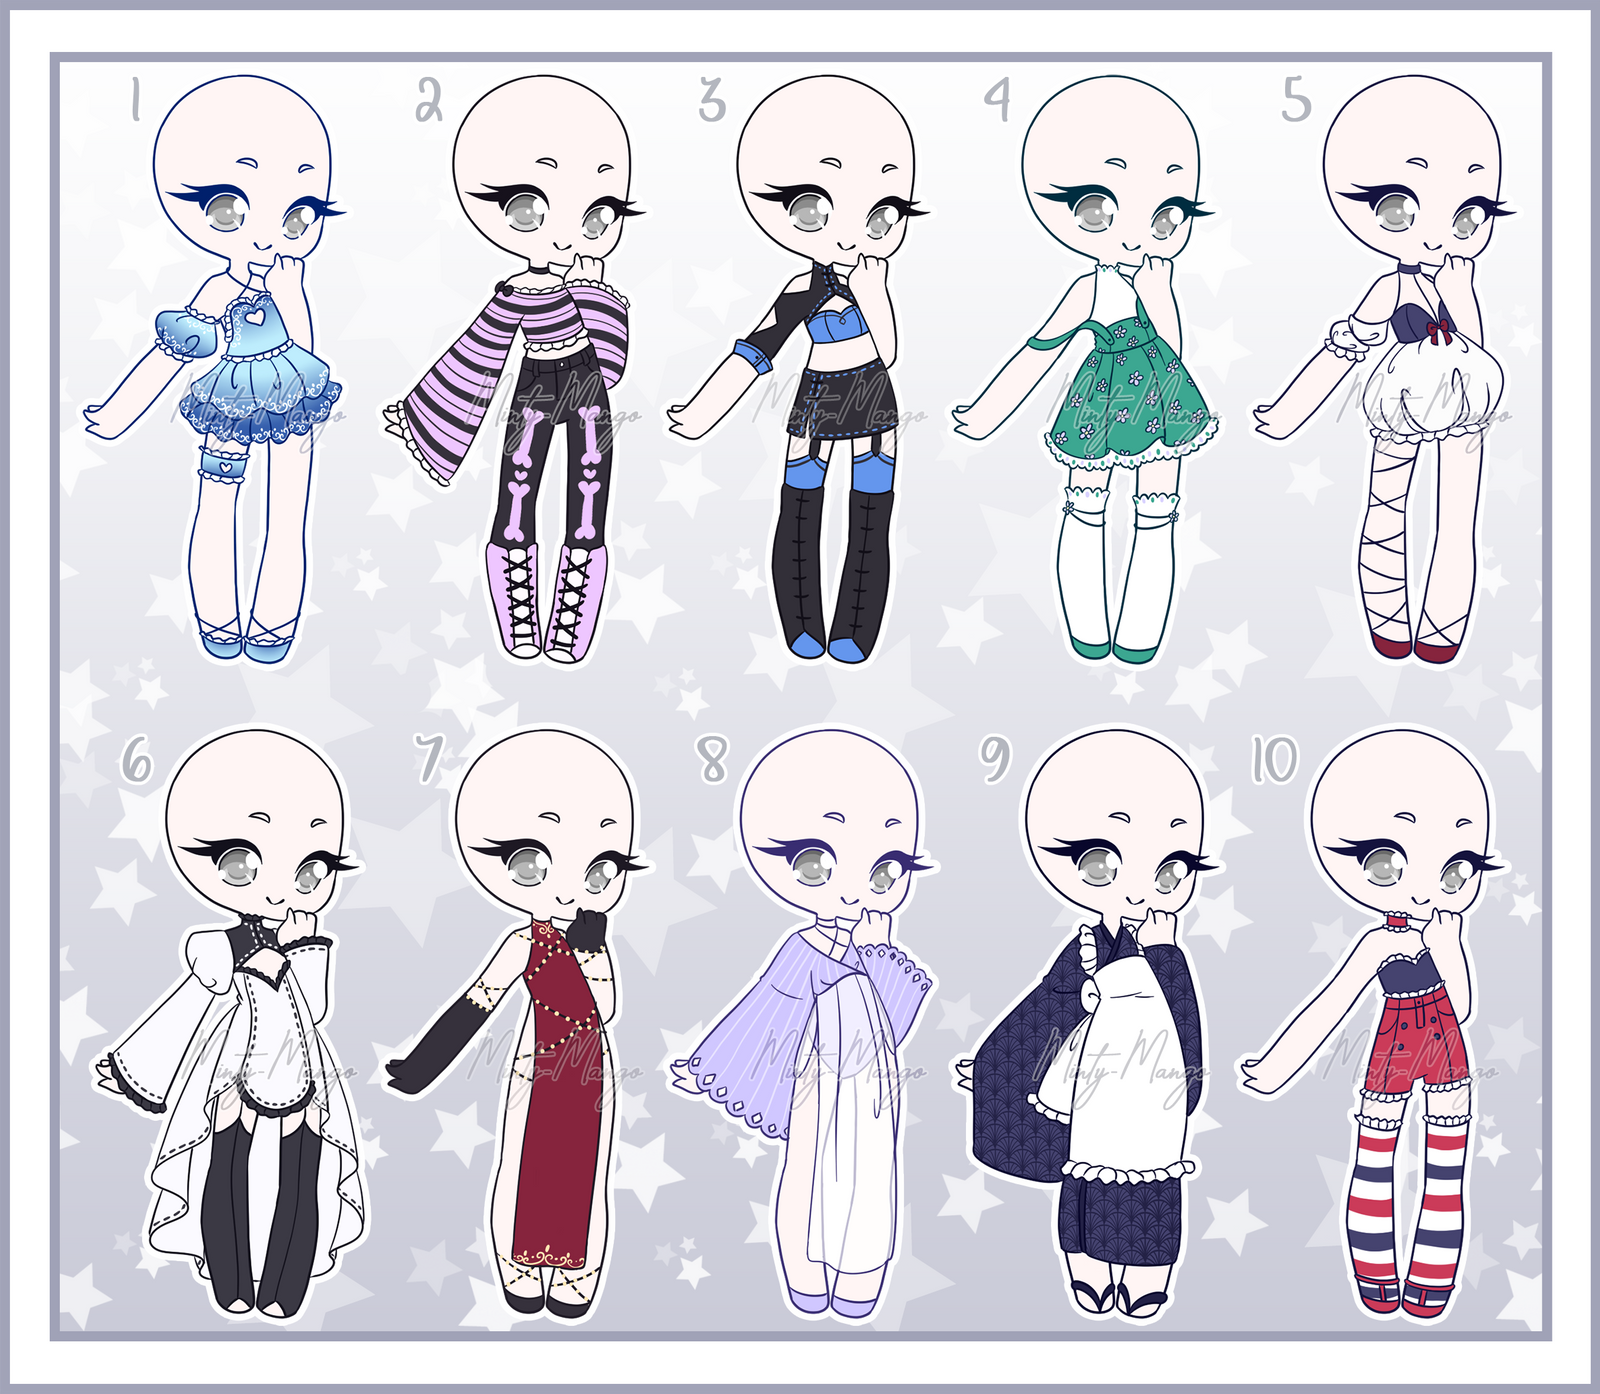 Chibi Outfit Adoptable Batch 04 - Closed by minty-mango on DeviantArt